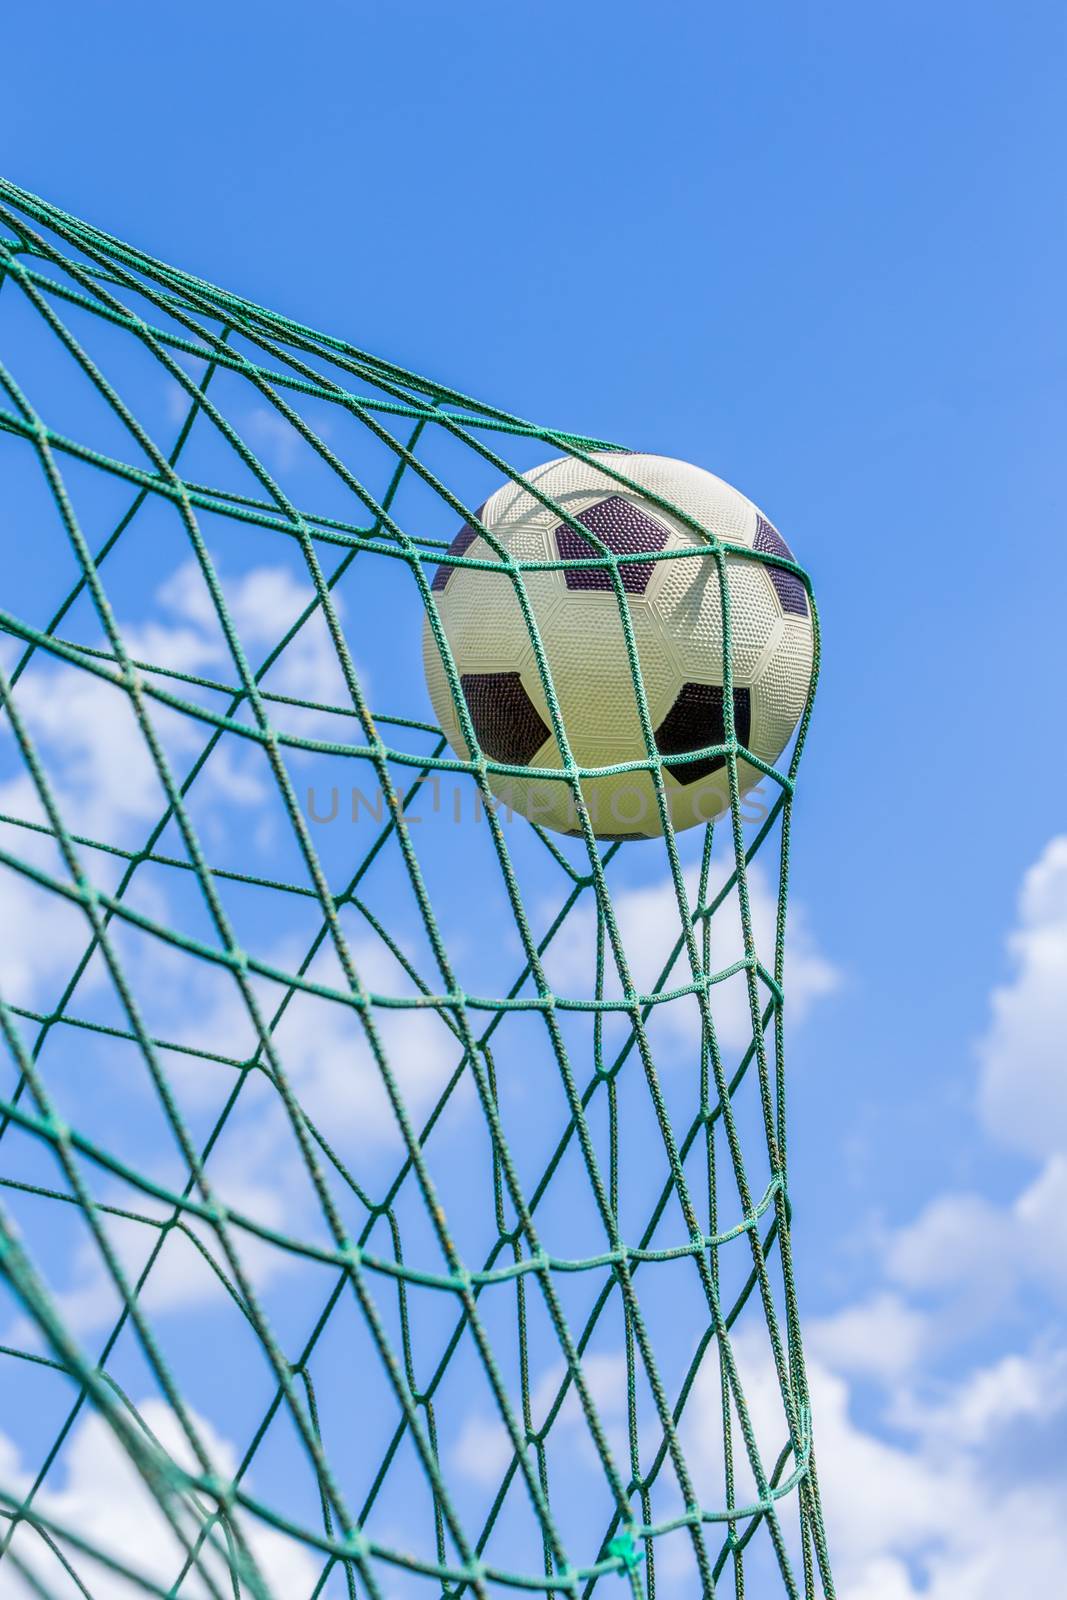 Football caught in goal net with blue sky by BenSchonewille